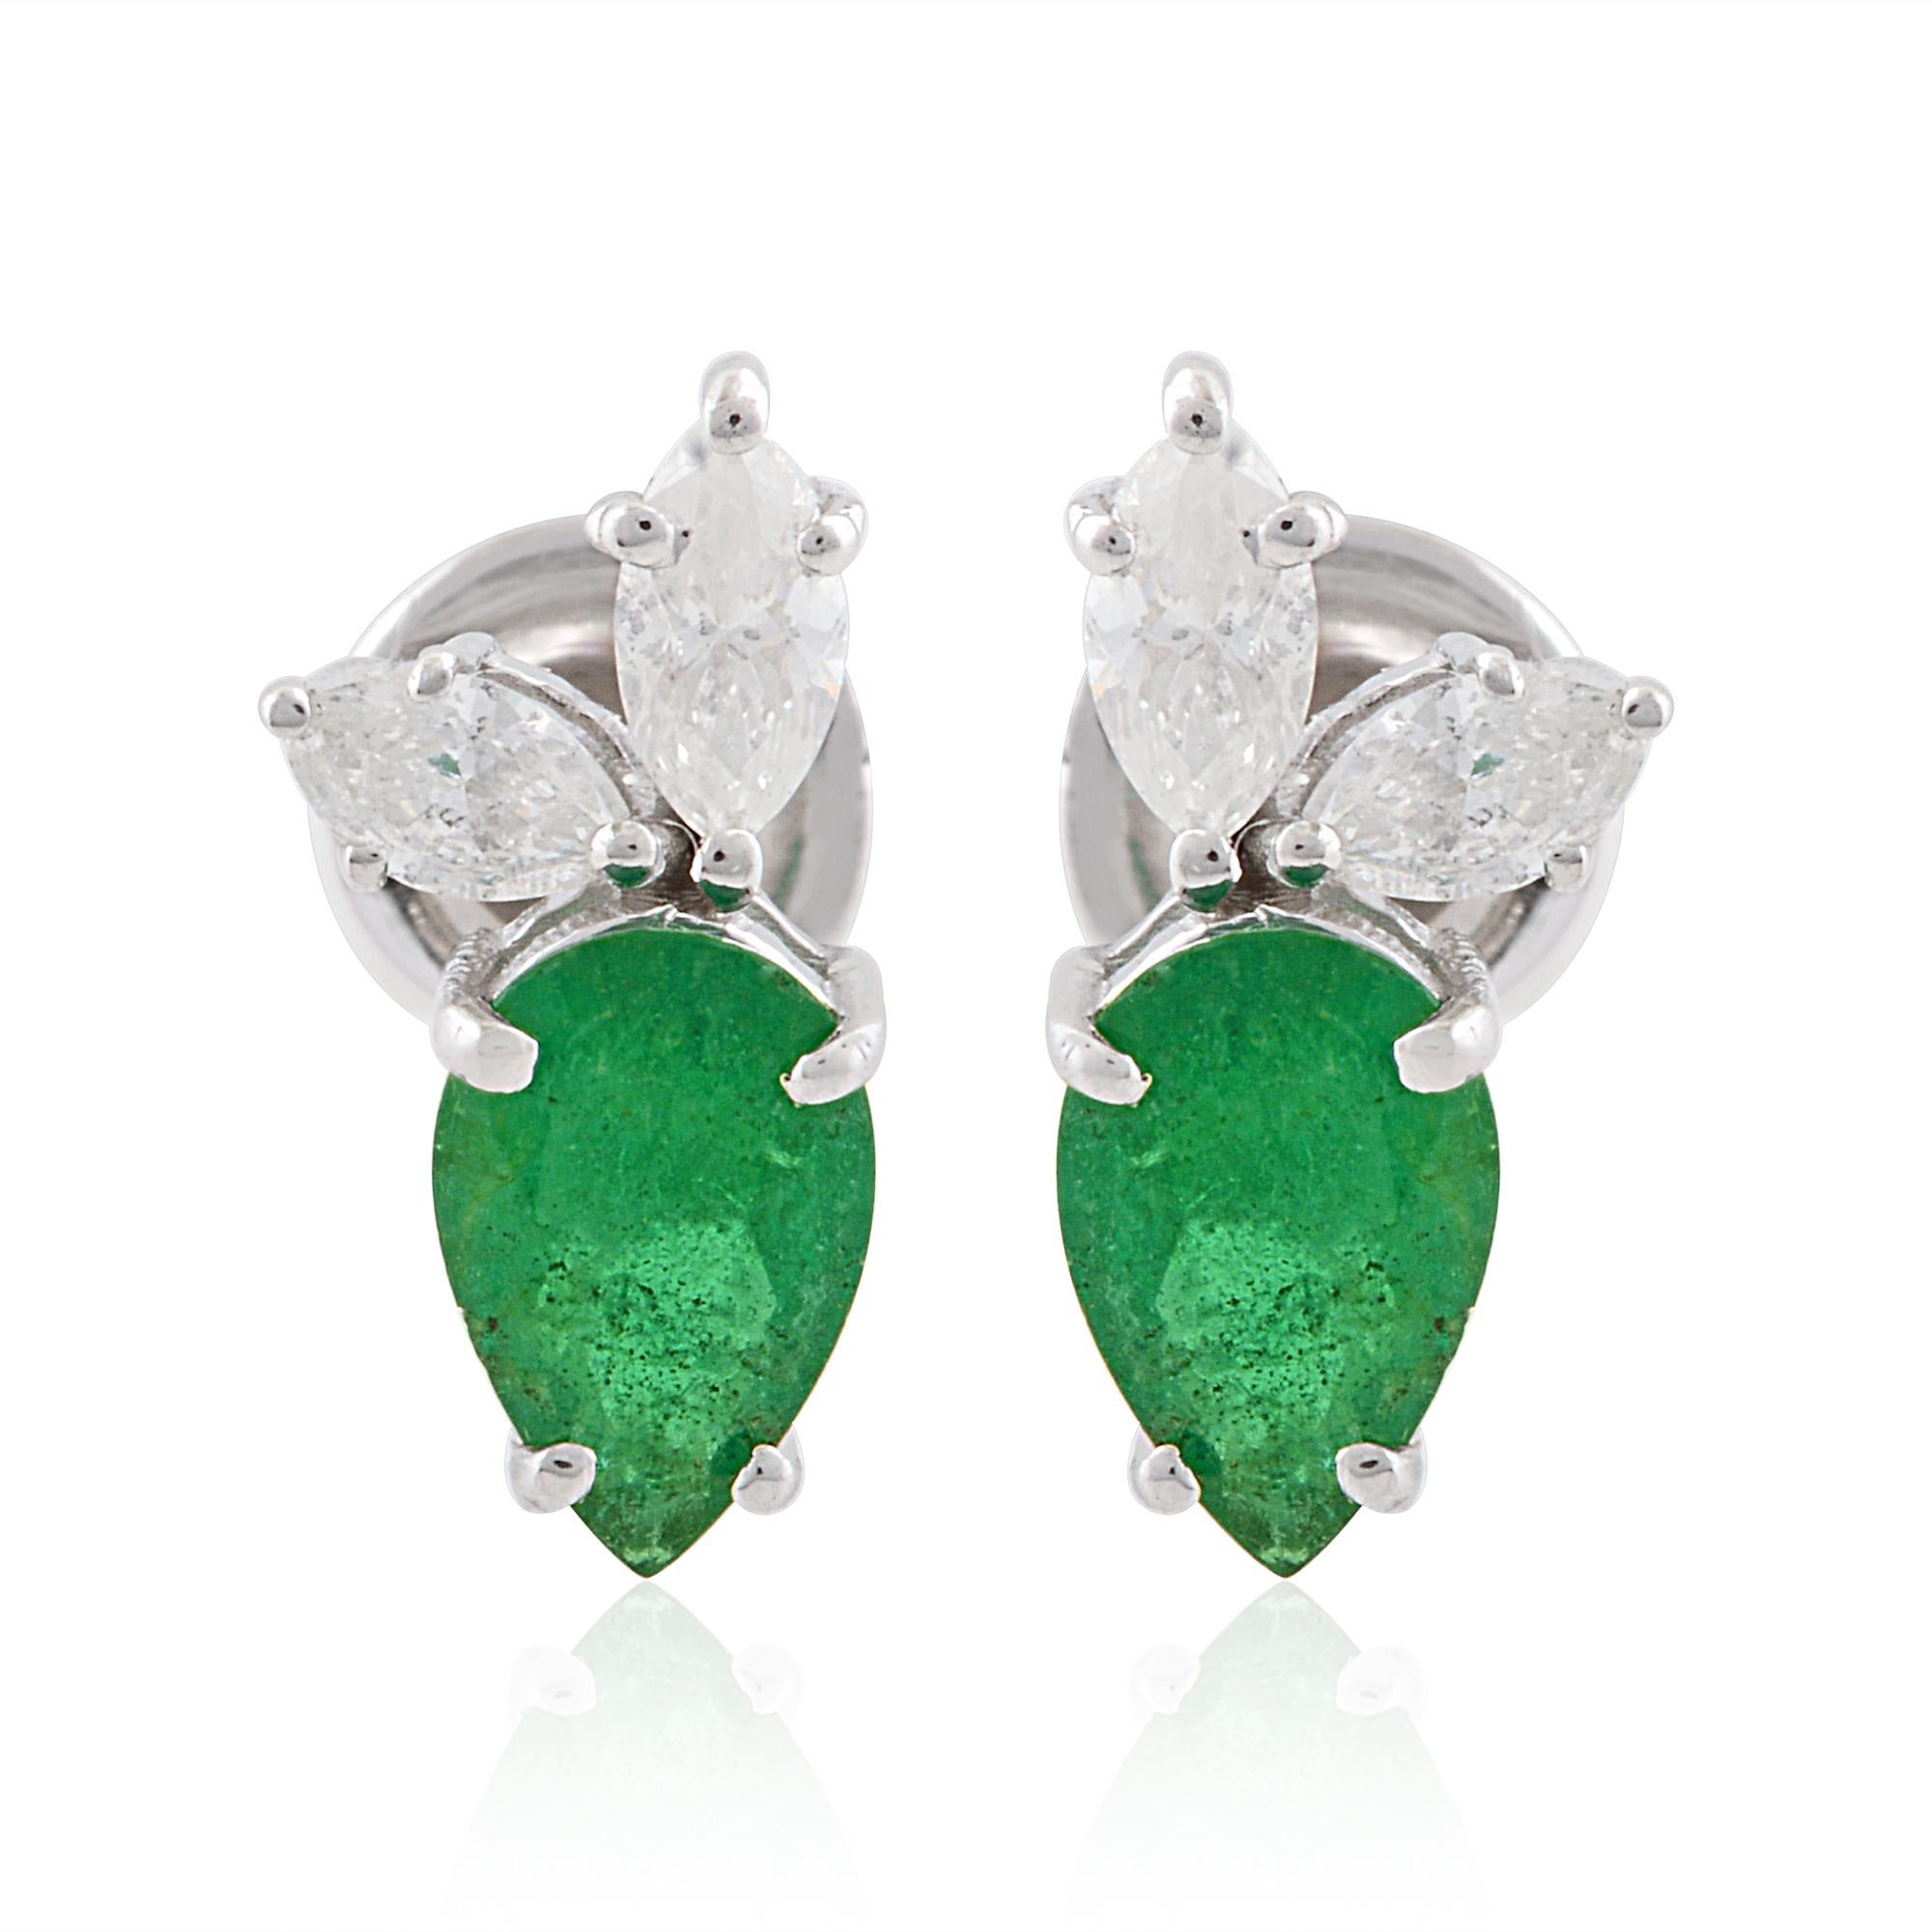 Item Code :- STE-1057
Gross Wet :- 1.67 gm
10k Solid White Gold Wet :- 1.47 gm
Diamond Wet :- 0.27 ct  ( AVERAGE DIAMOND CLARITY SI1-SI2 & COLOR H-I )
Emerald Wet :- 0.75 ct
Earrings Size :- 11x6 mm approx.

✦ Sizing
.....................
We can